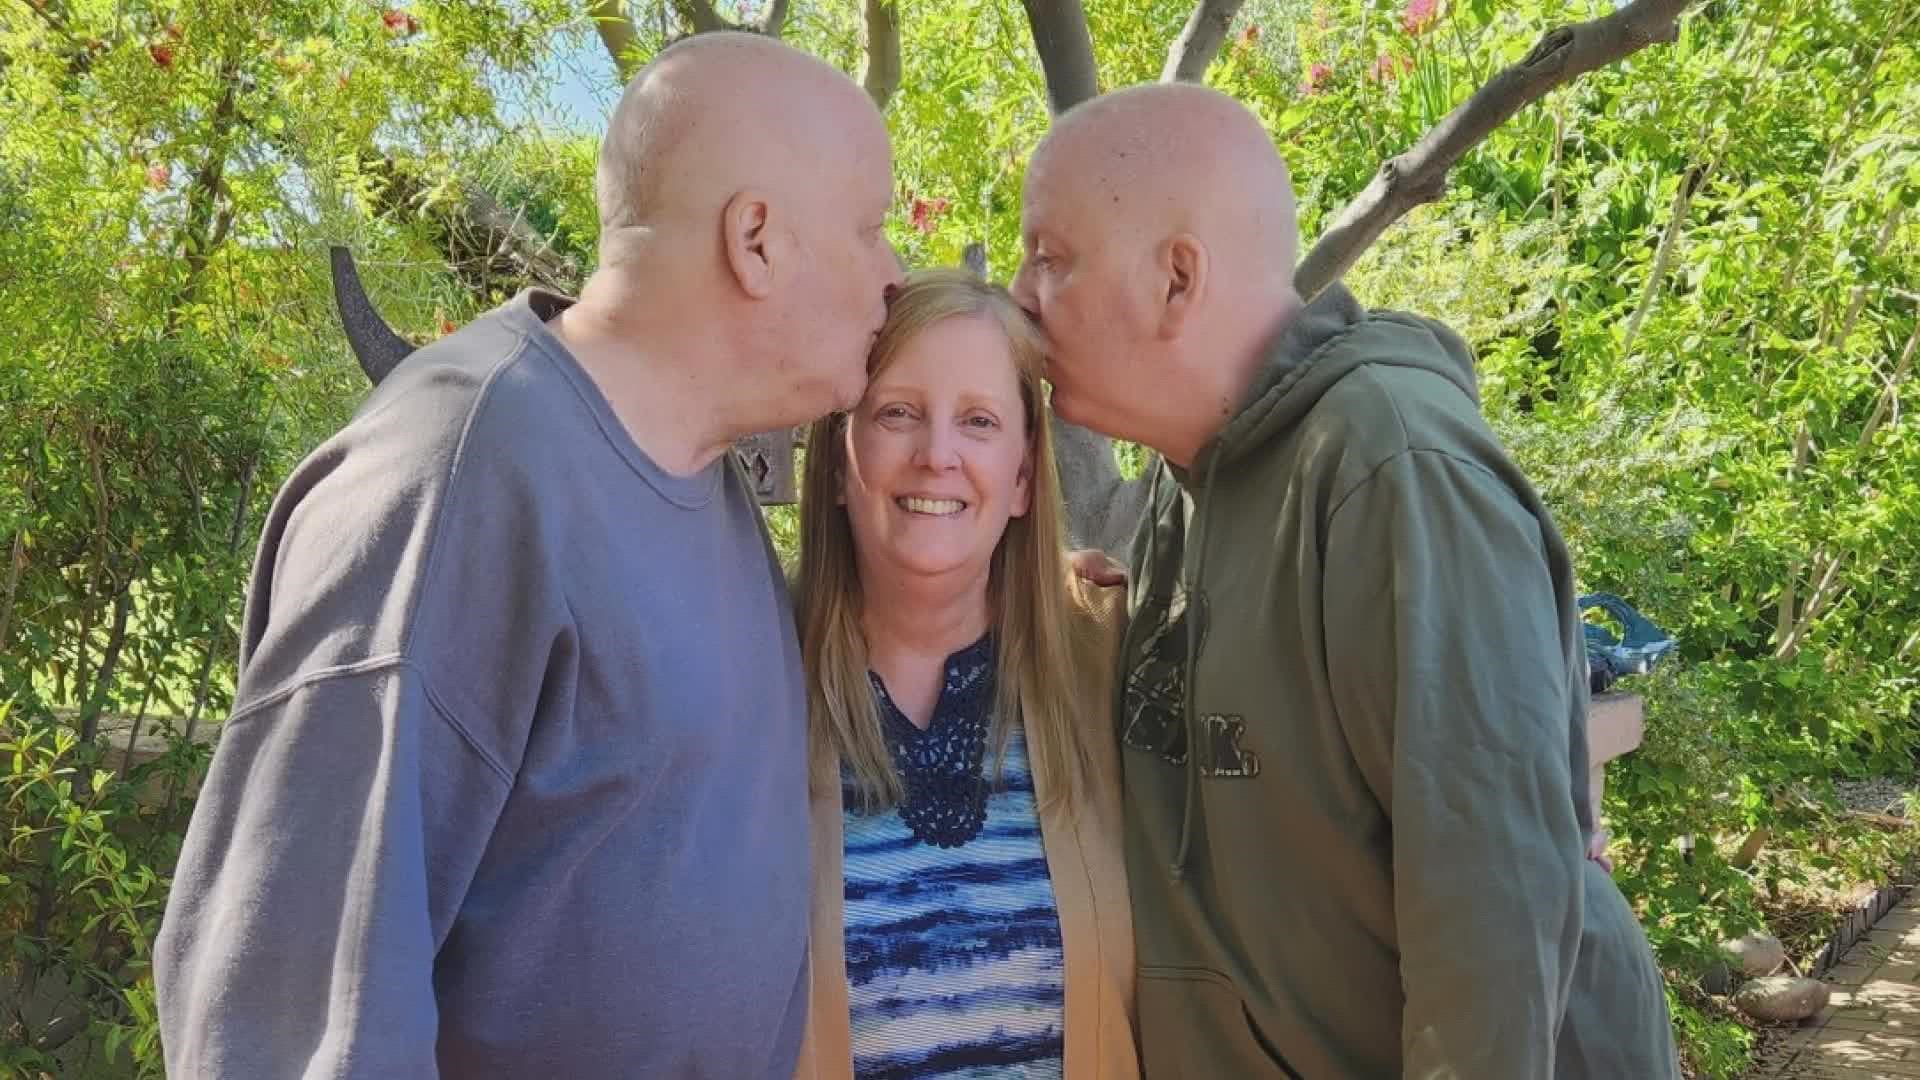 12News was there for the emotional meeting between two brothers and the sister they had never met before in person.